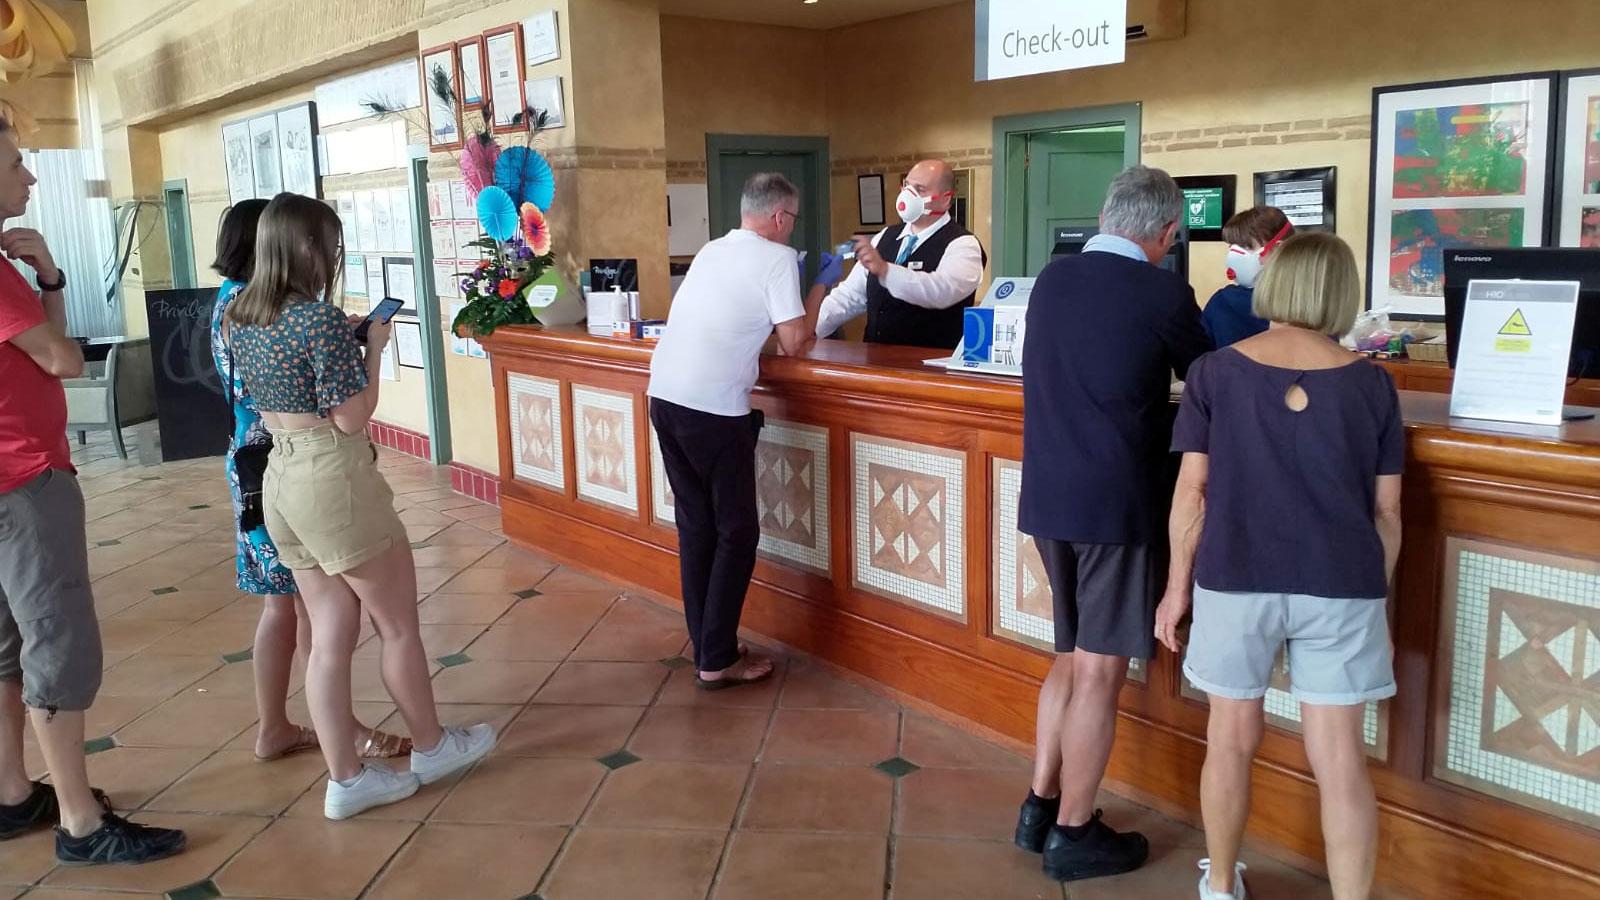 Several people are shown standing at the counter of a hotel resort with the words, "Check out" on a sign behind the counter.